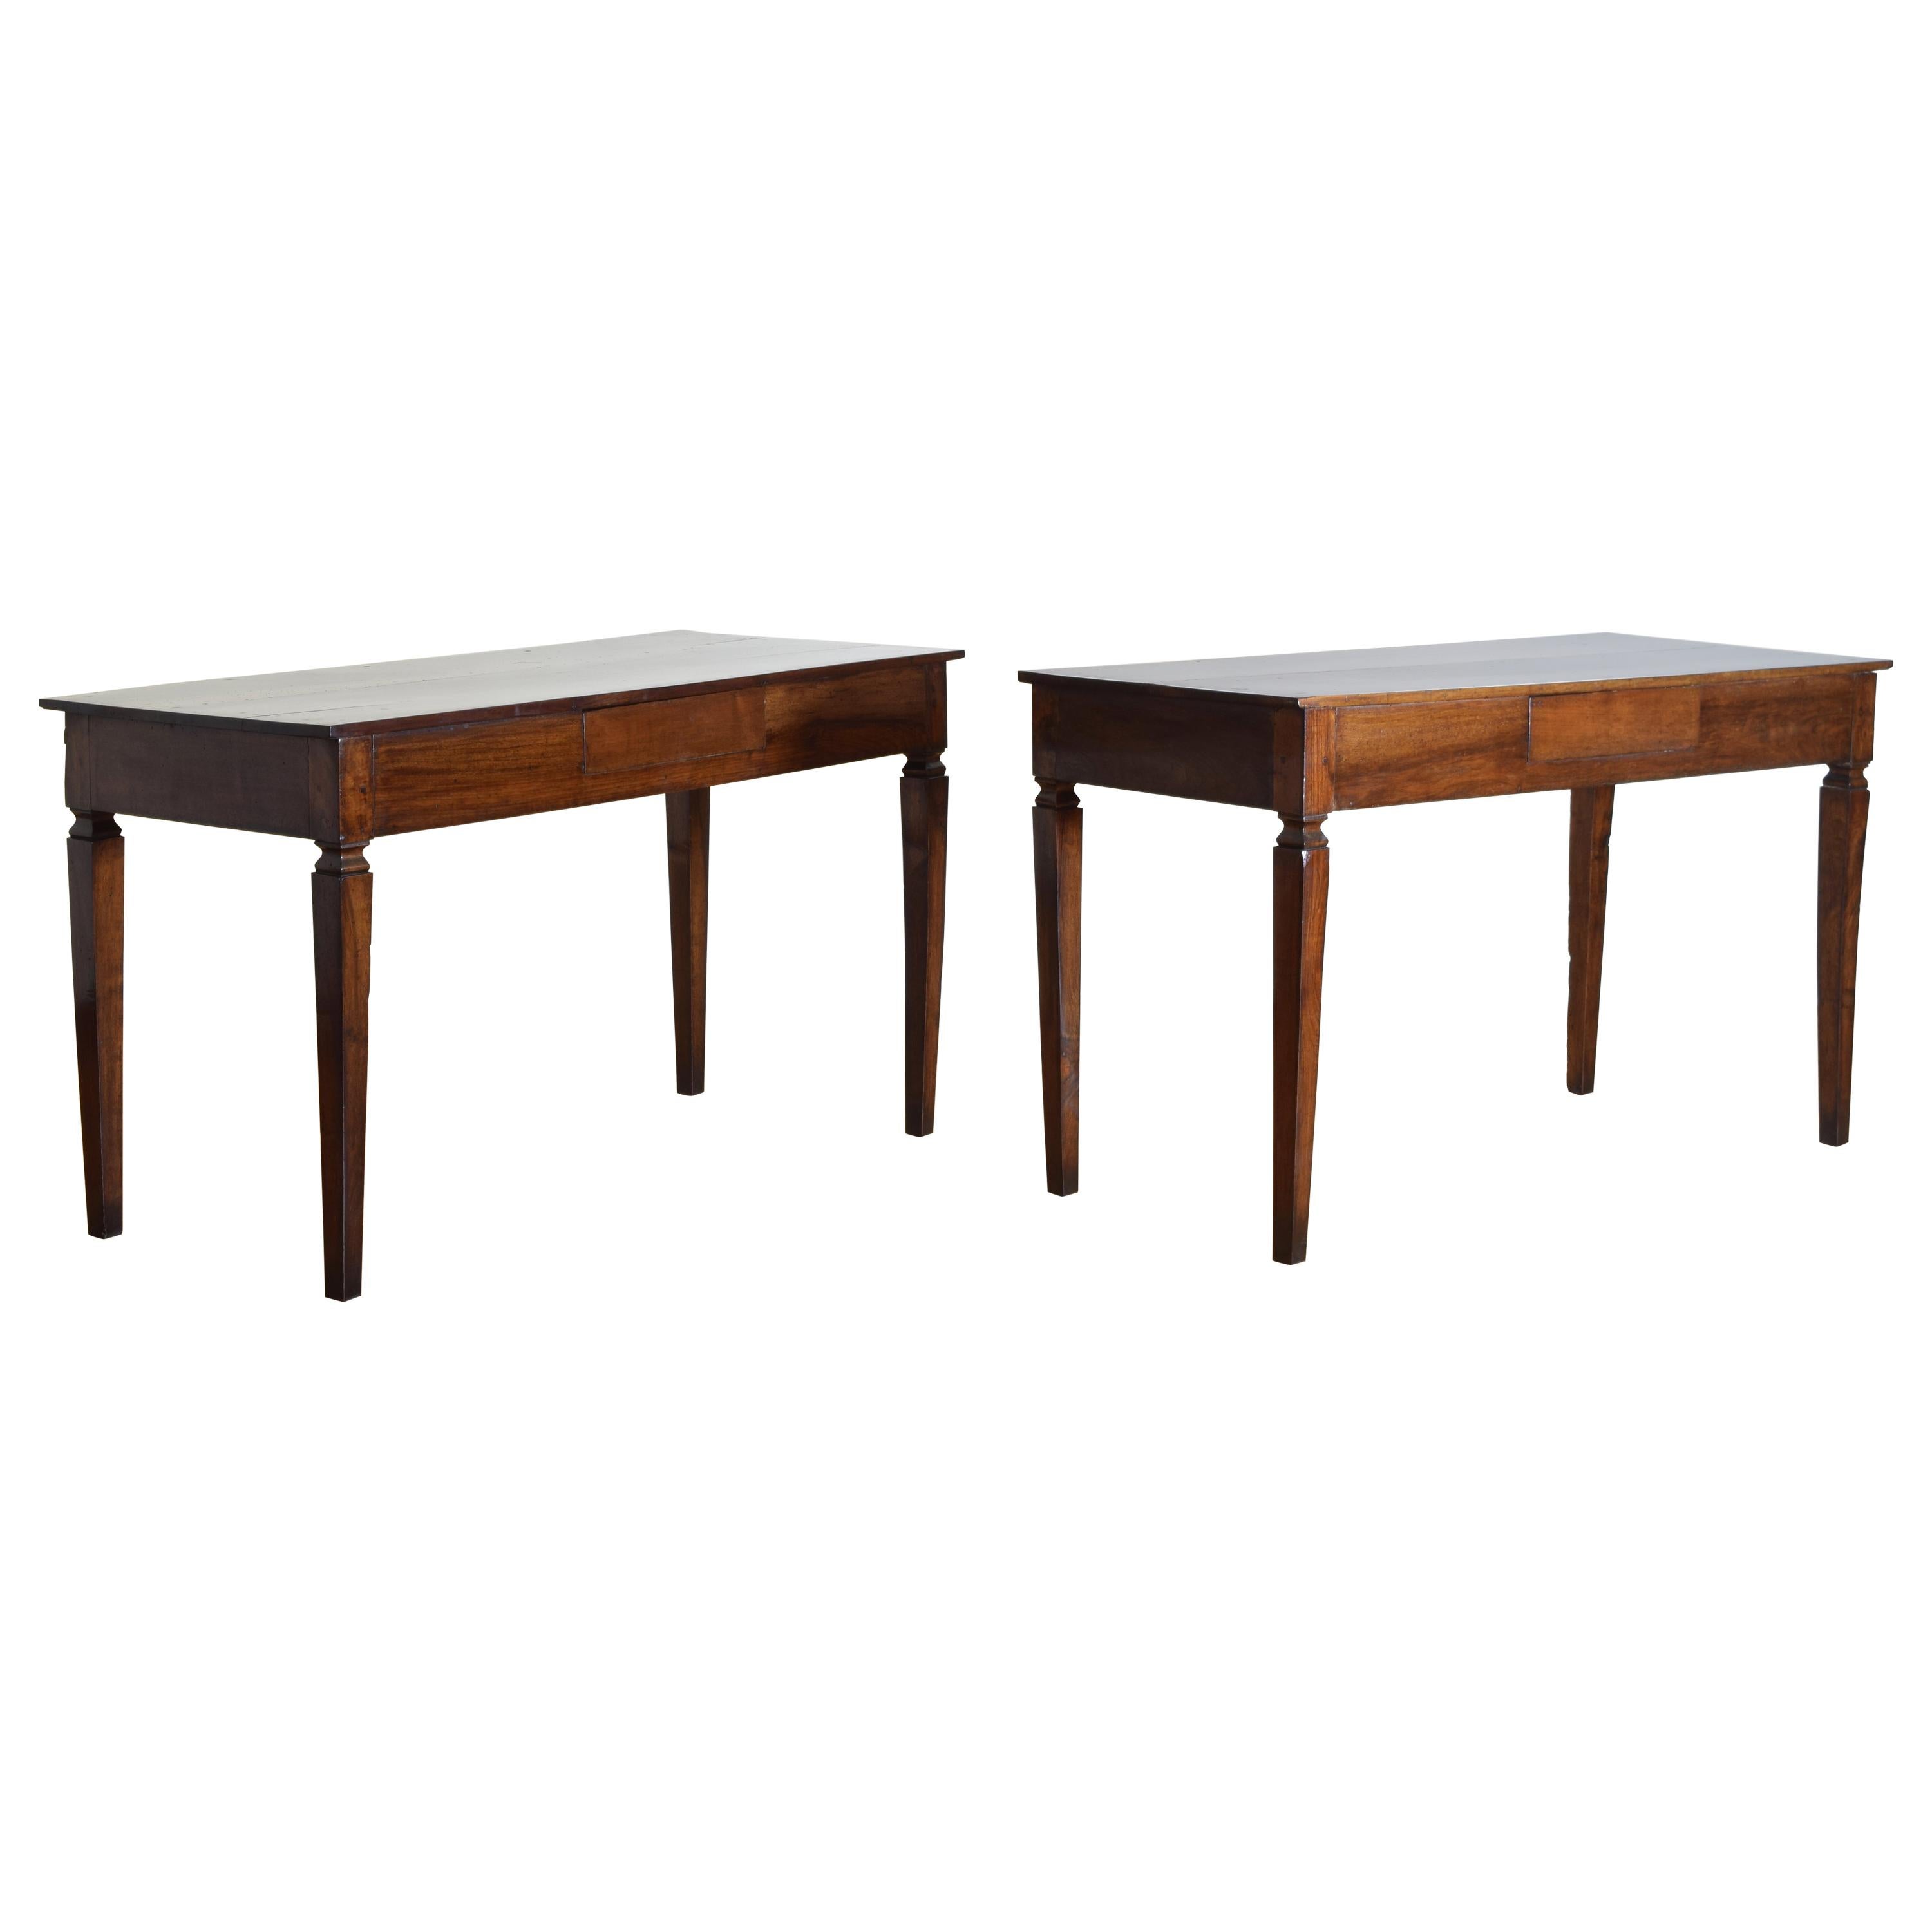 Pair of Italian Neoclassic Walnut 1-Drawer Console Tables, 19th Century